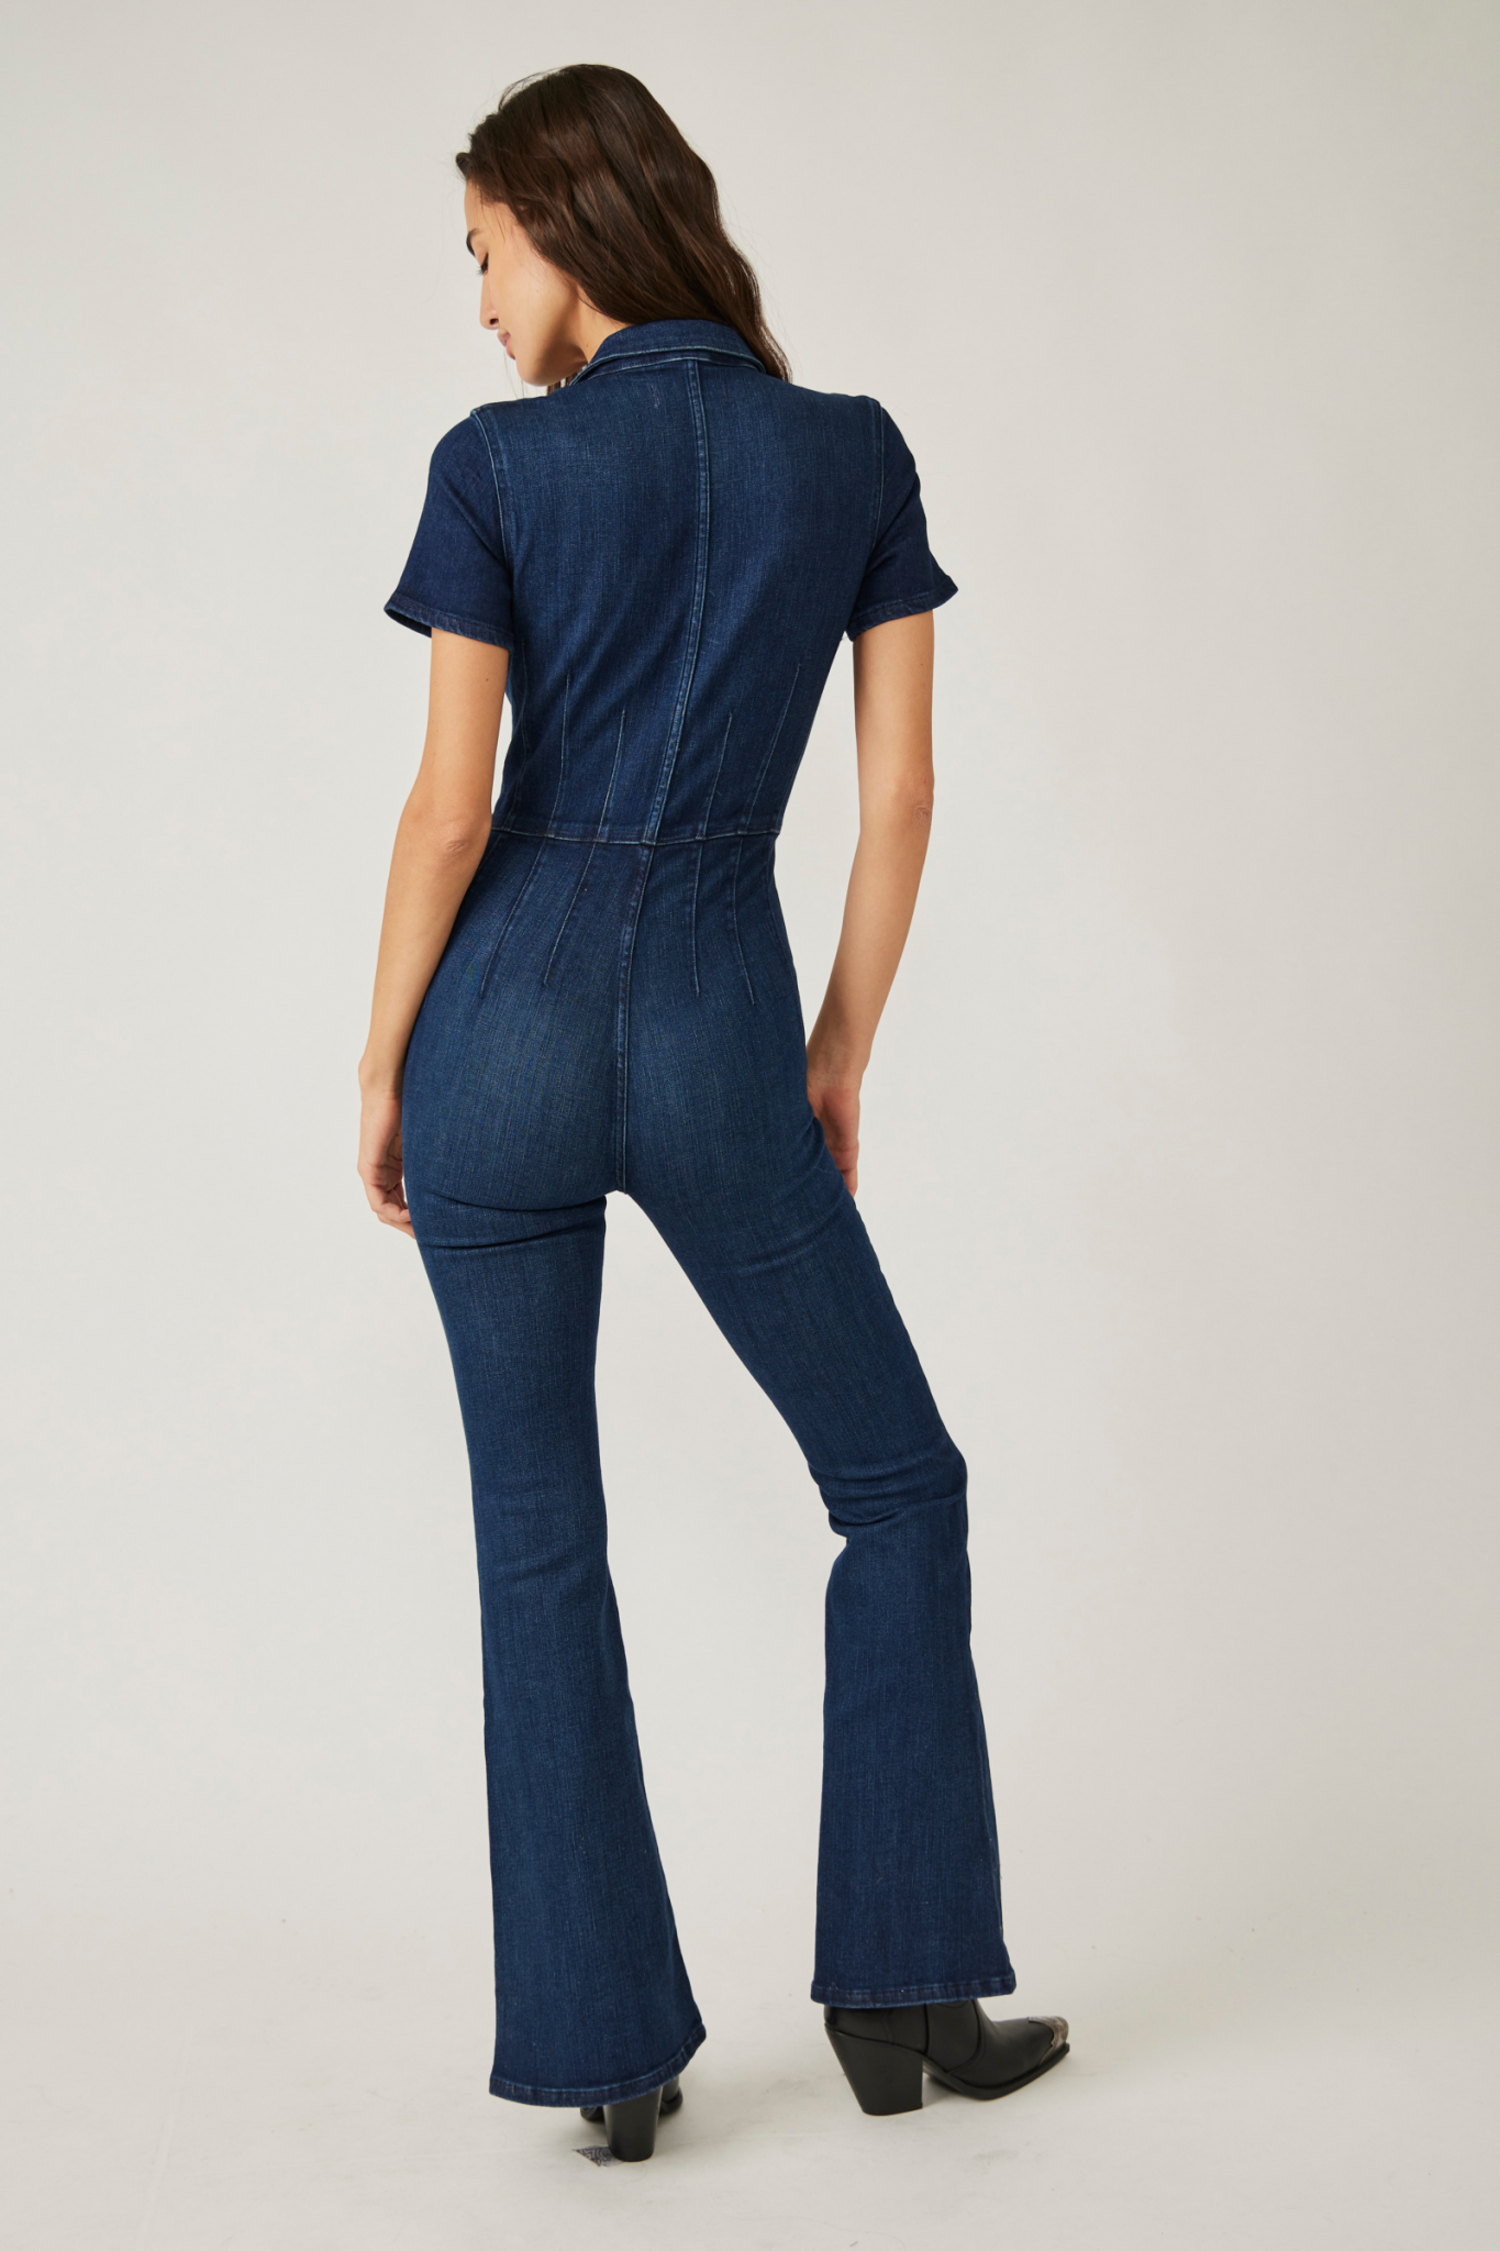 Free People Bali Albright Jumpsuit - Women's - Clothing